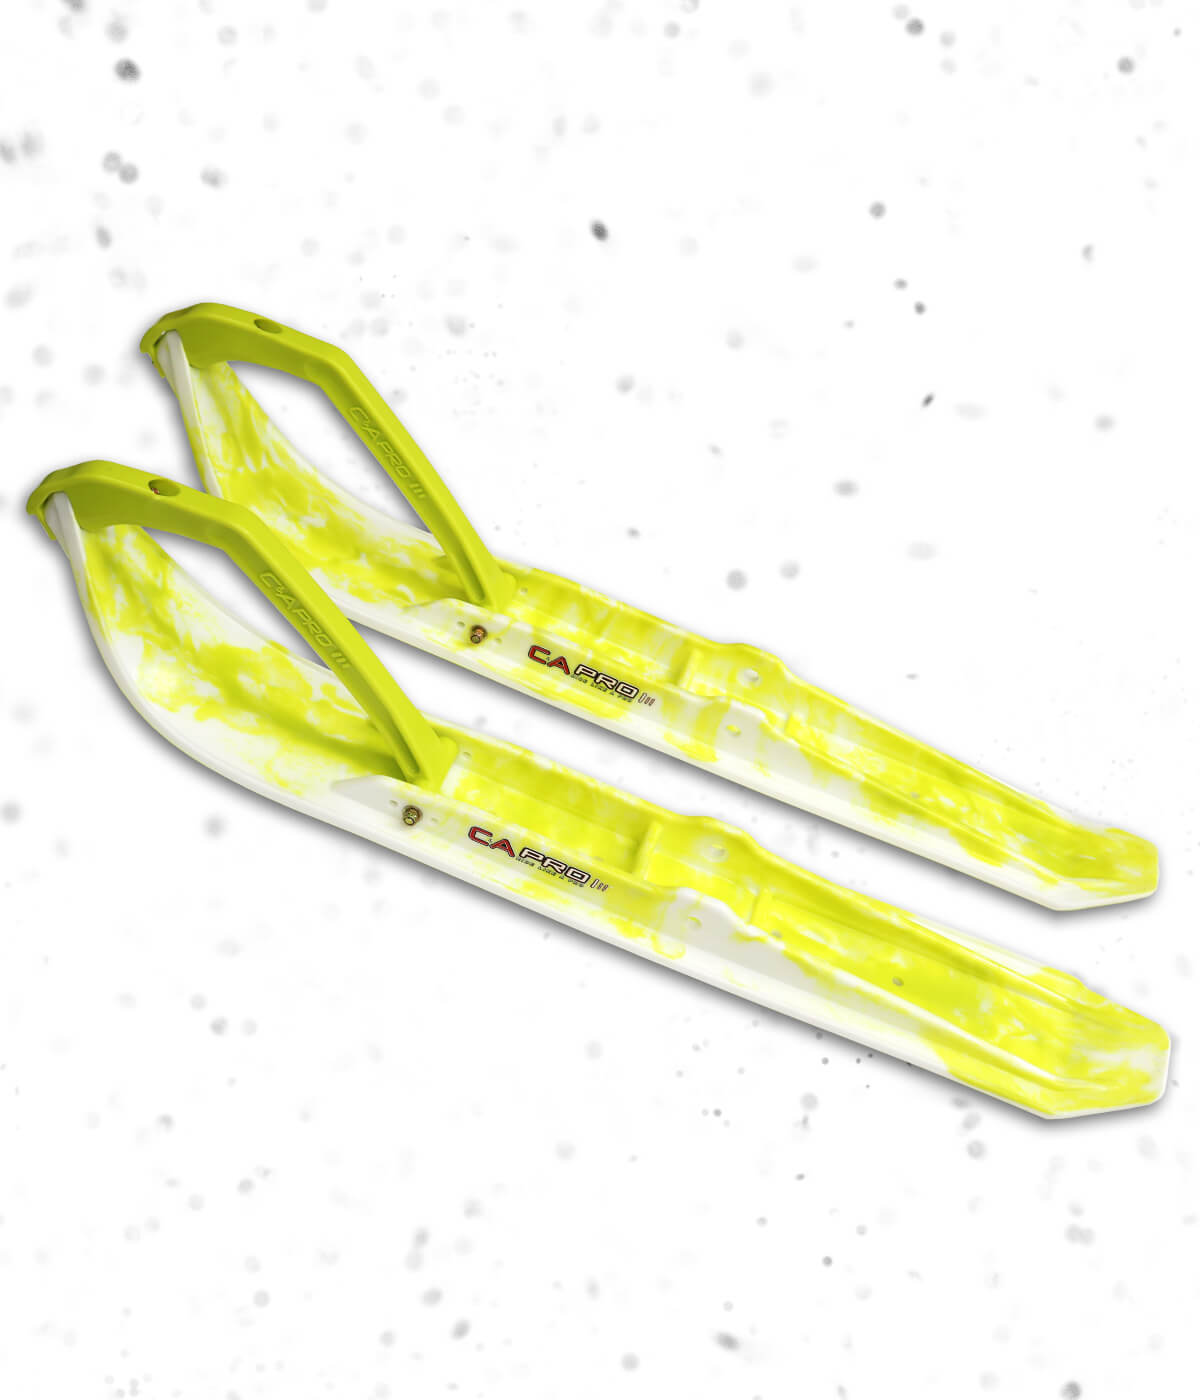 C&A Pro custom XPT trail skis with White base, Lime Green accent and Lime Green handles